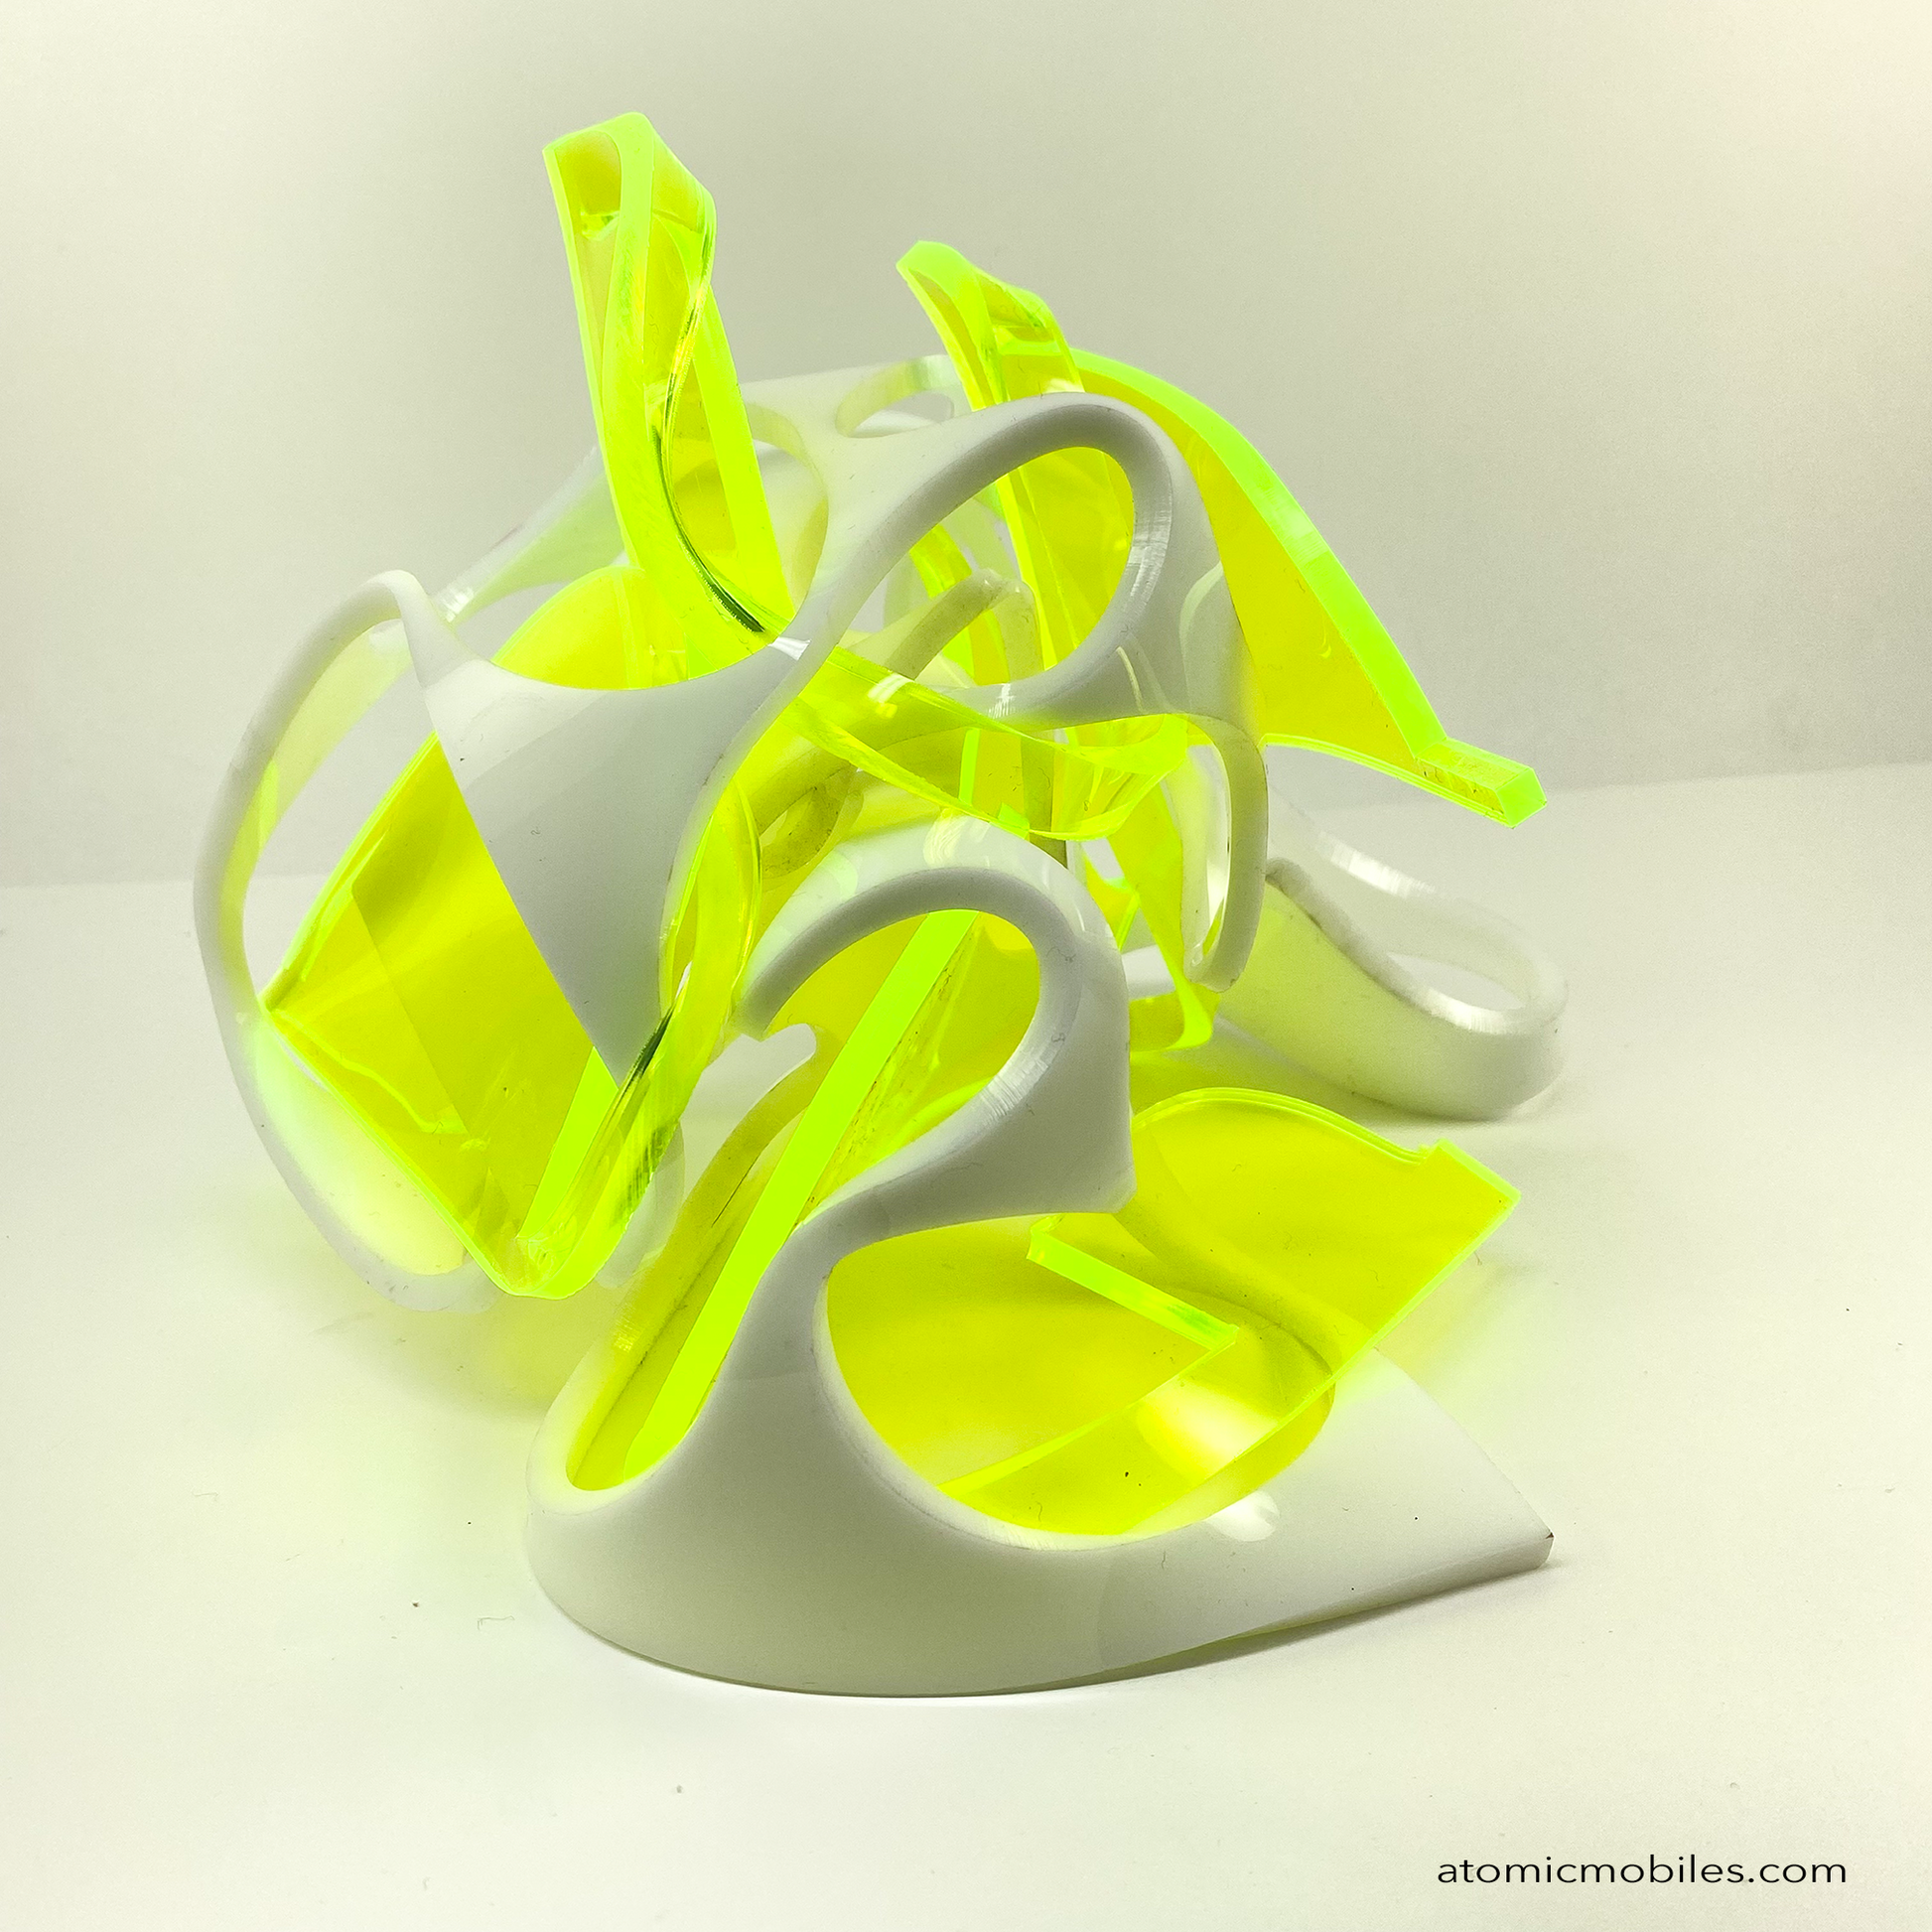 Another view of Thrill abstract art sculpture in neon fluorescent green and opaque white acrylic plexiglass - upcycled and recycled acrylic one-of-a-kind modern art by Debra Ann of AtomicMobiles.com in Los Angeles